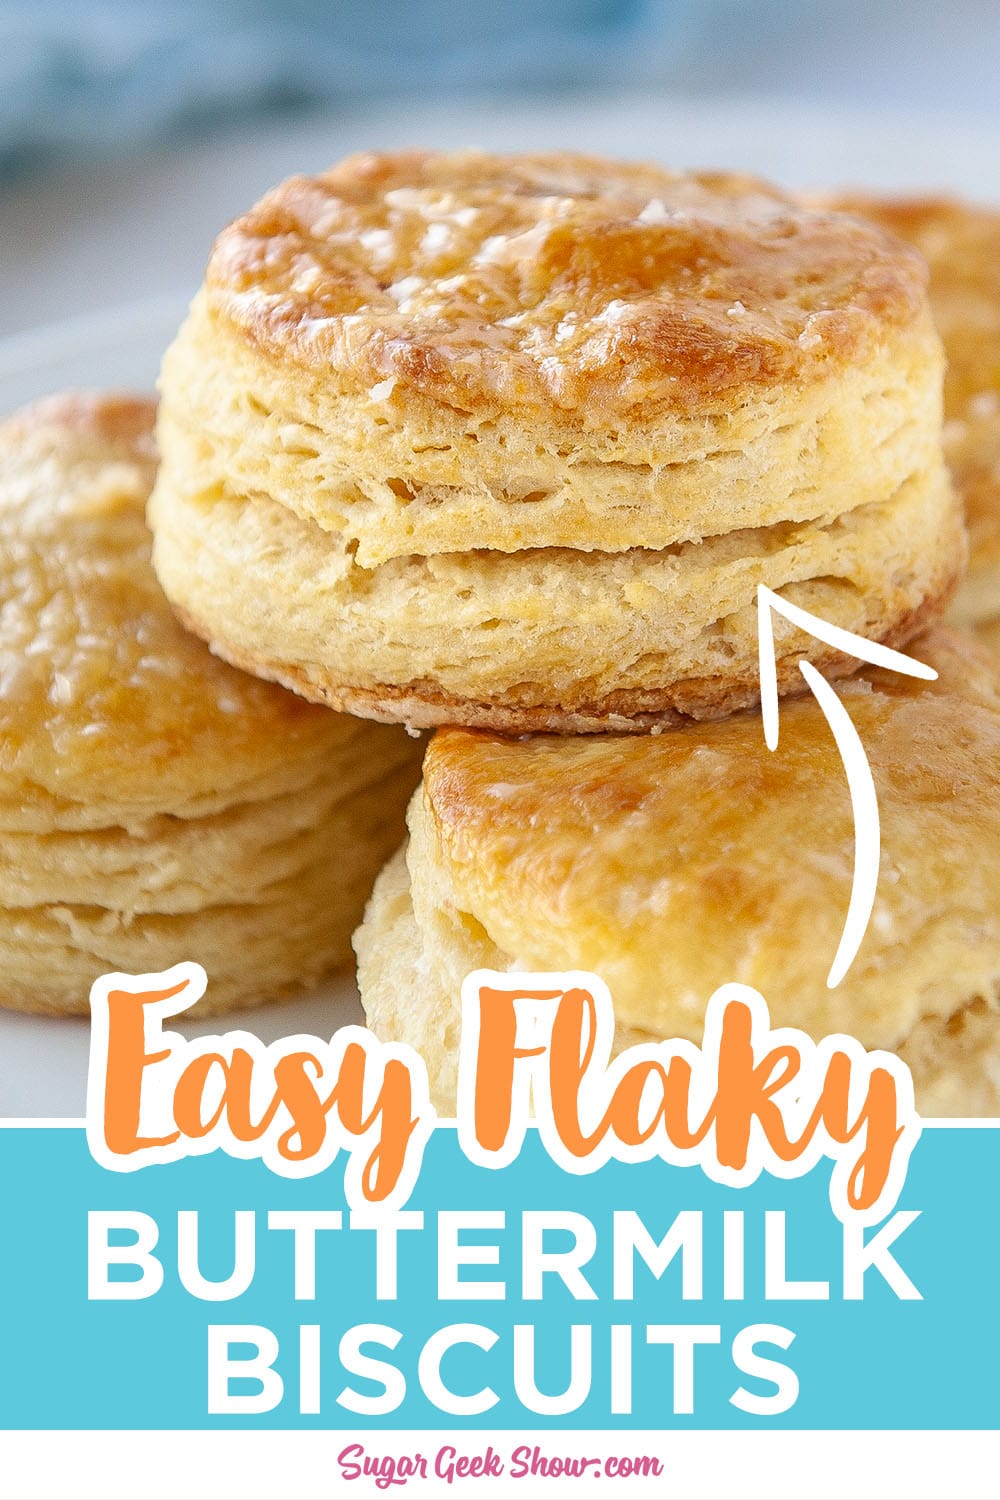 Easy Flaky Buttermilk Biscuits (With Video) – Sugar Geek Show